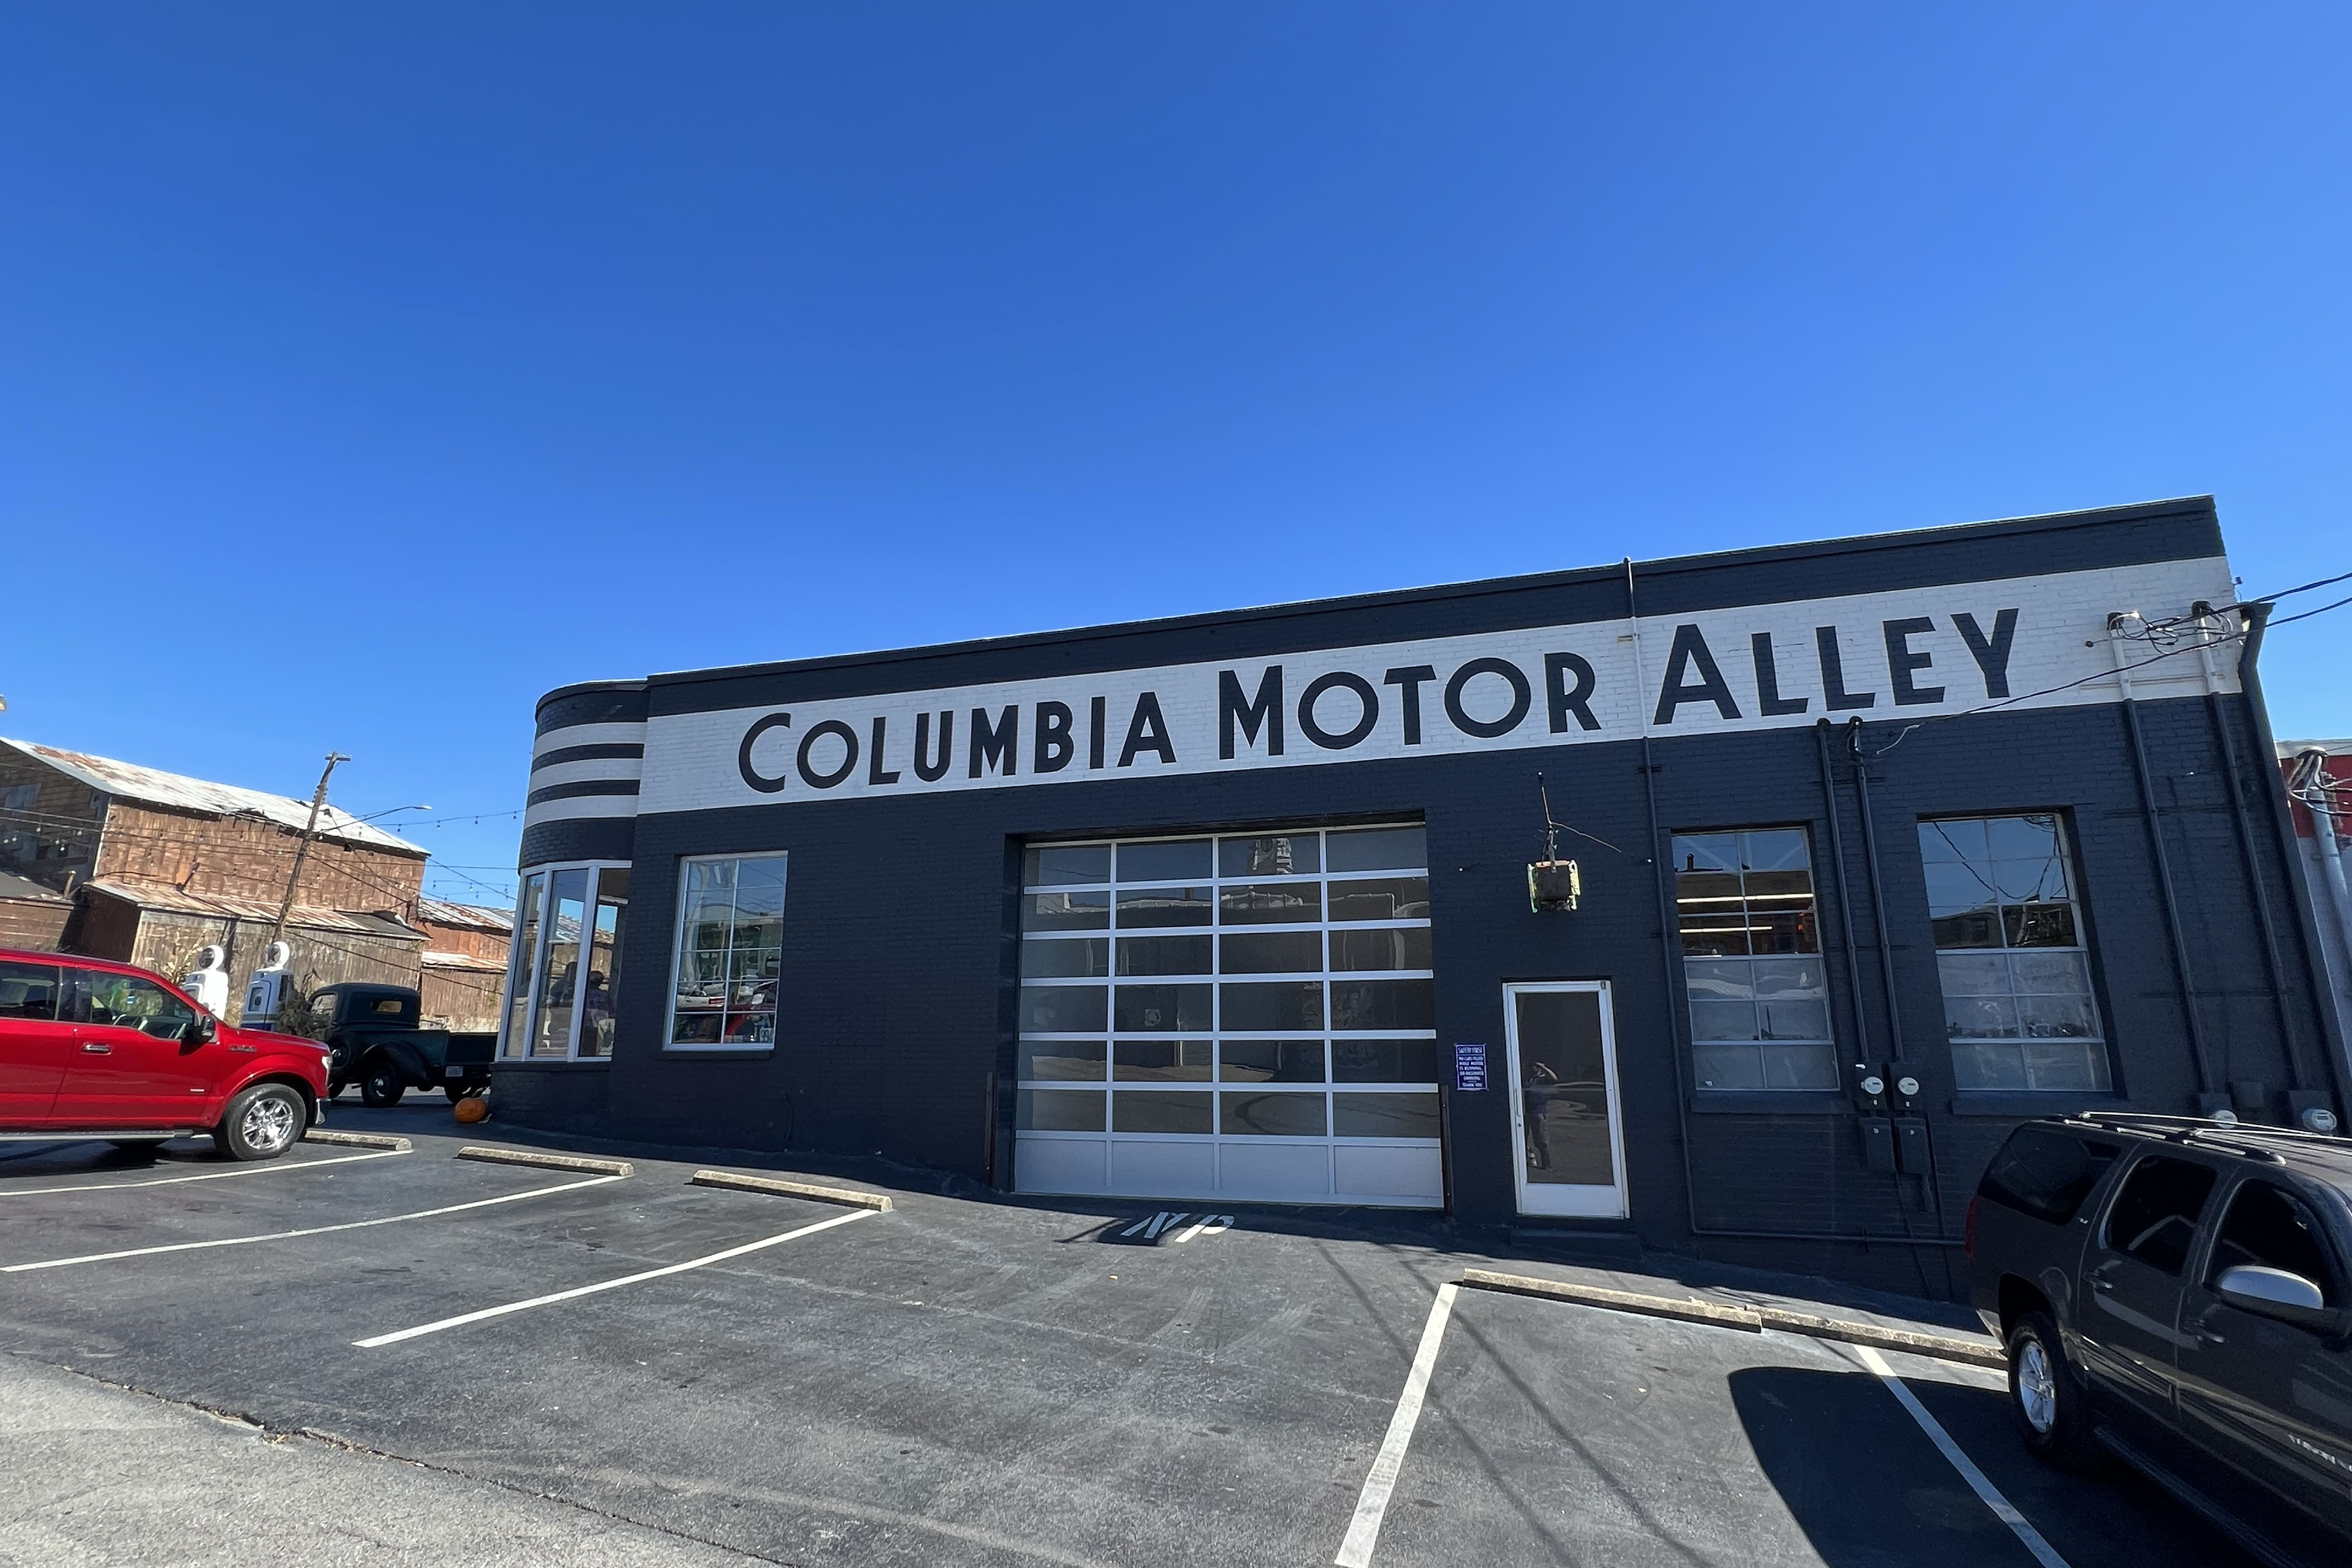 Mike owns Columbia Motor Alley, a former Chevrolet dealership